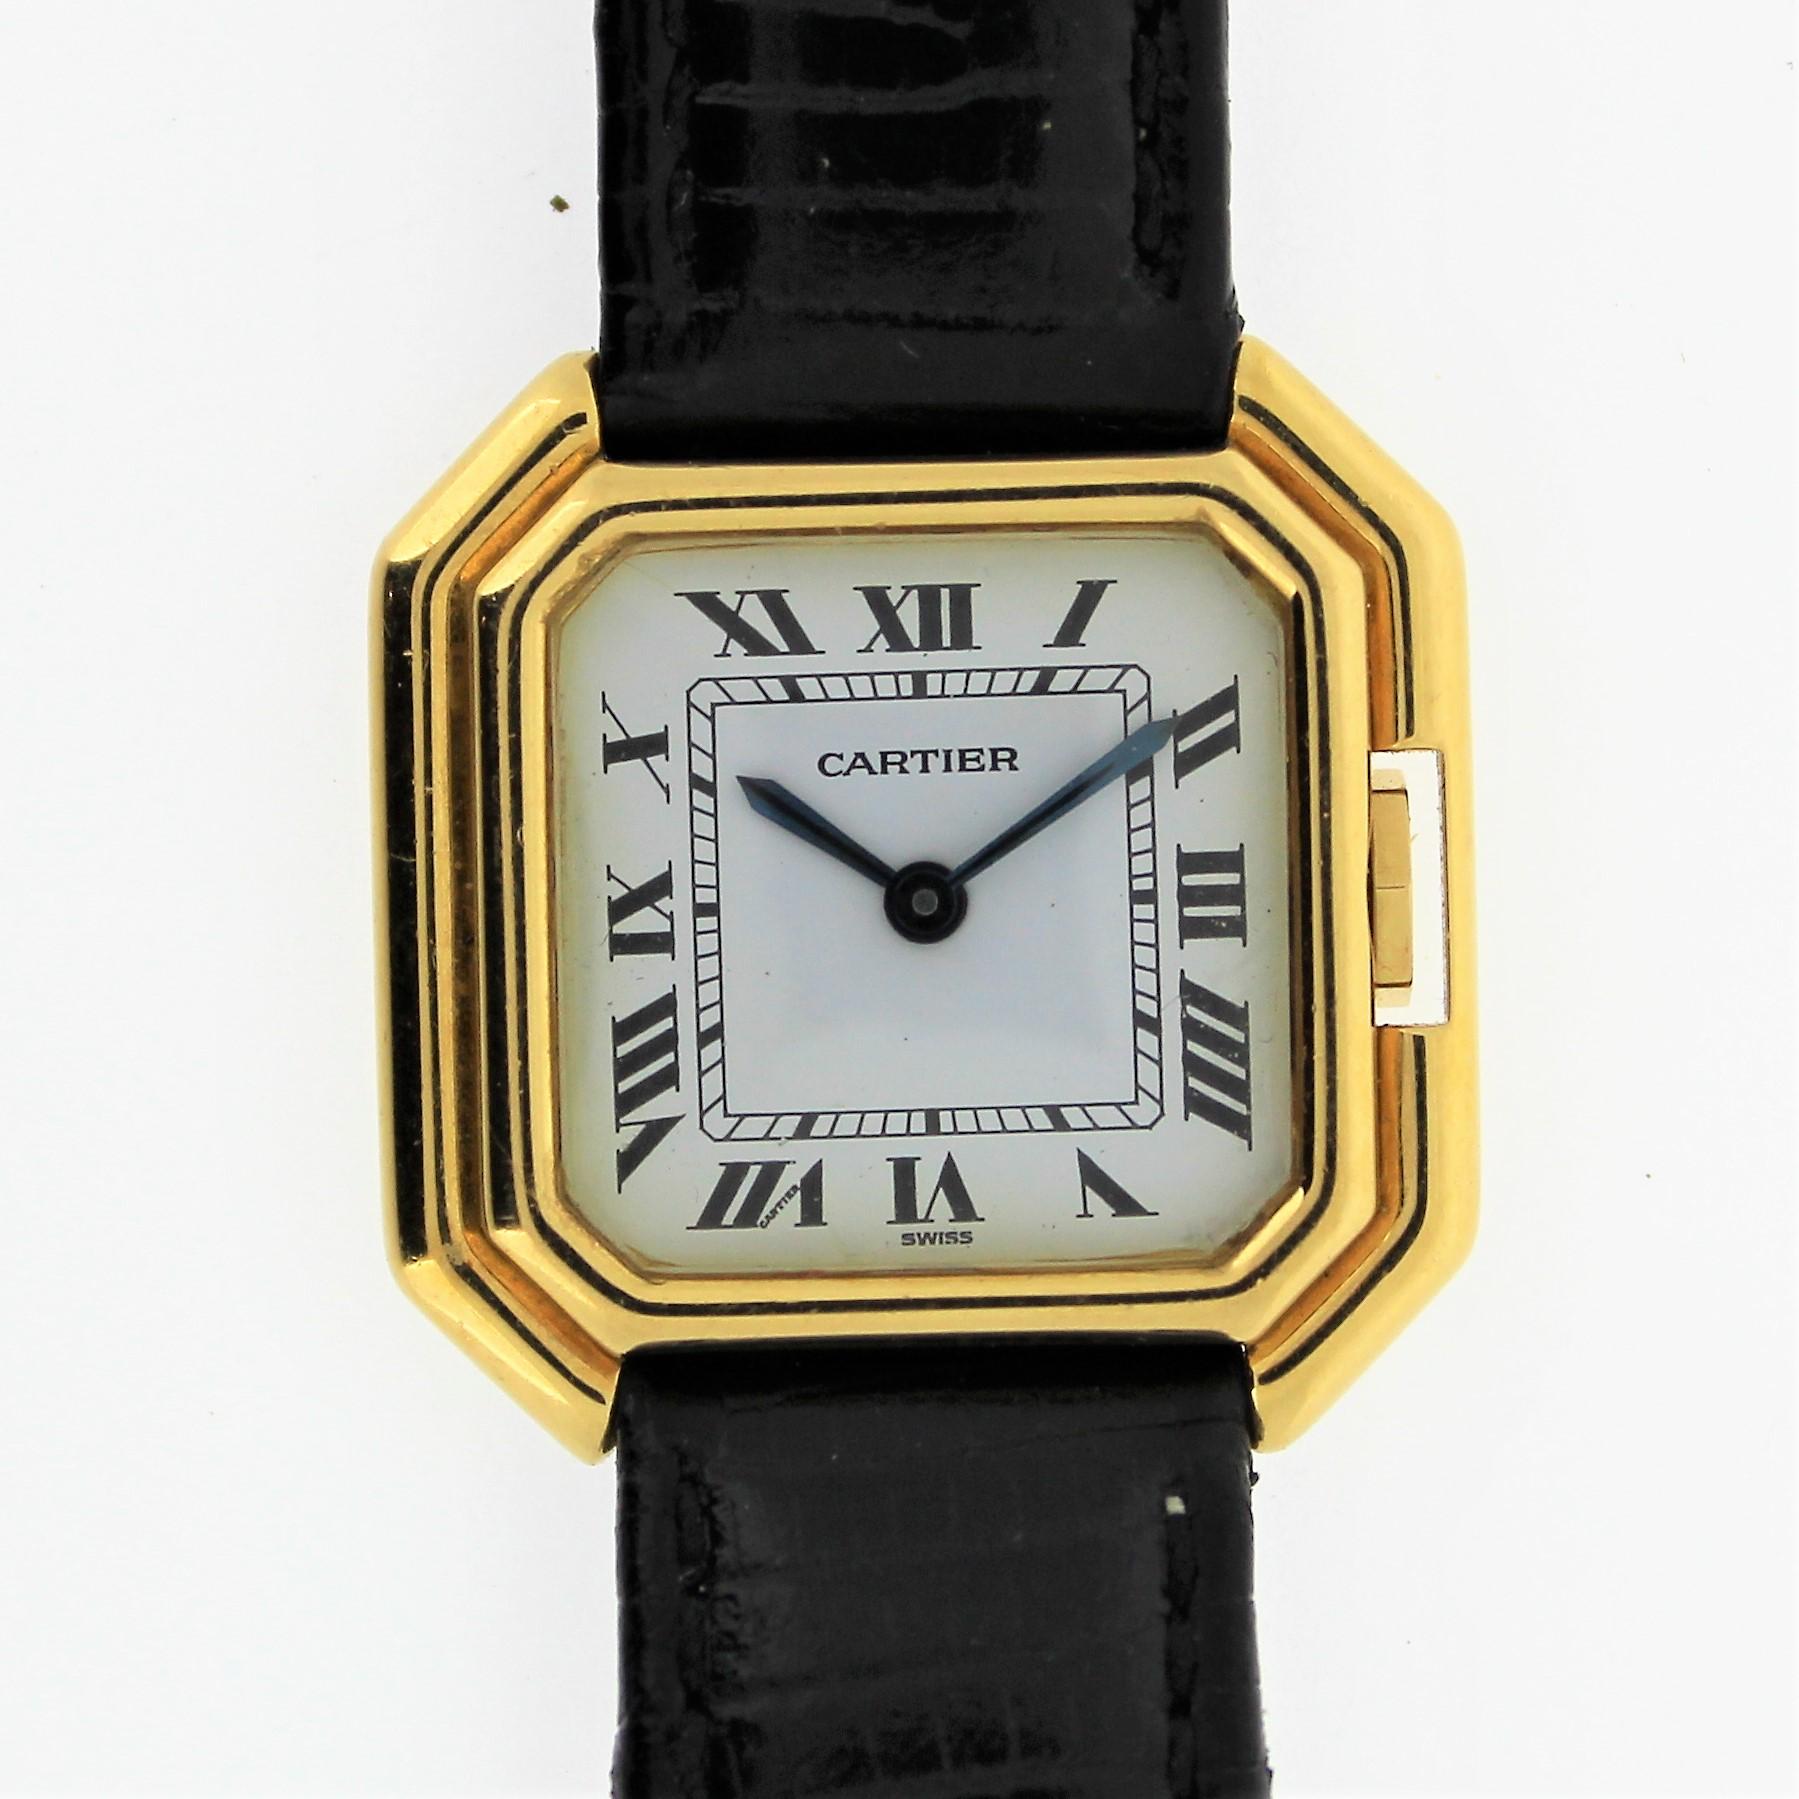 Introduction:
This Vintage Cartier Paris Centure Octagon Shape is the medium size, circa 1975-1980.  It is 18K yellow gold and measures 28 x 28 mm with a mechanical manual wind 17-jewel movement.  It has the original black lizard strap with 18K